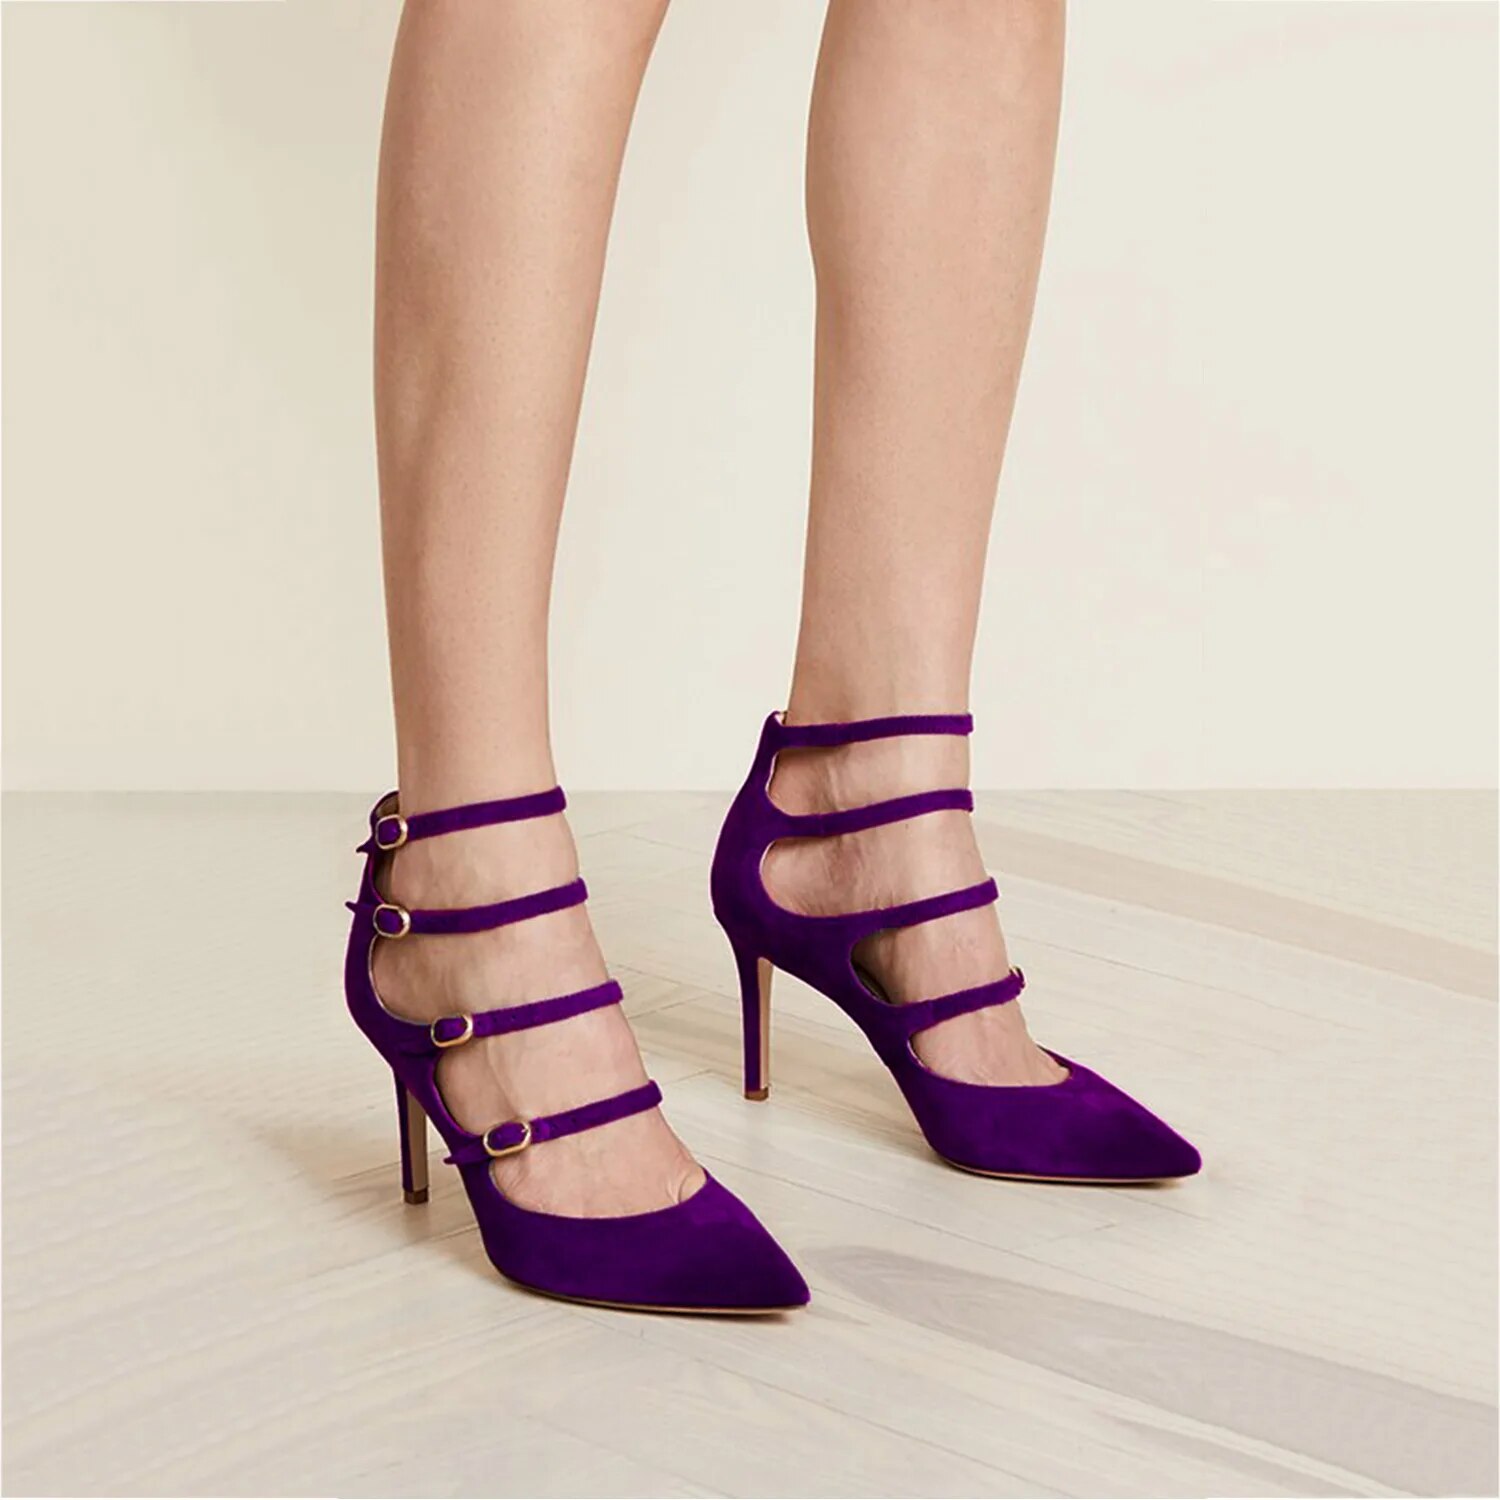 TAAFO Purple Four Buckle Strap Suede Women' Pumps High Stiletto Heels Narrow Band Dress Office Ladies Shoes 